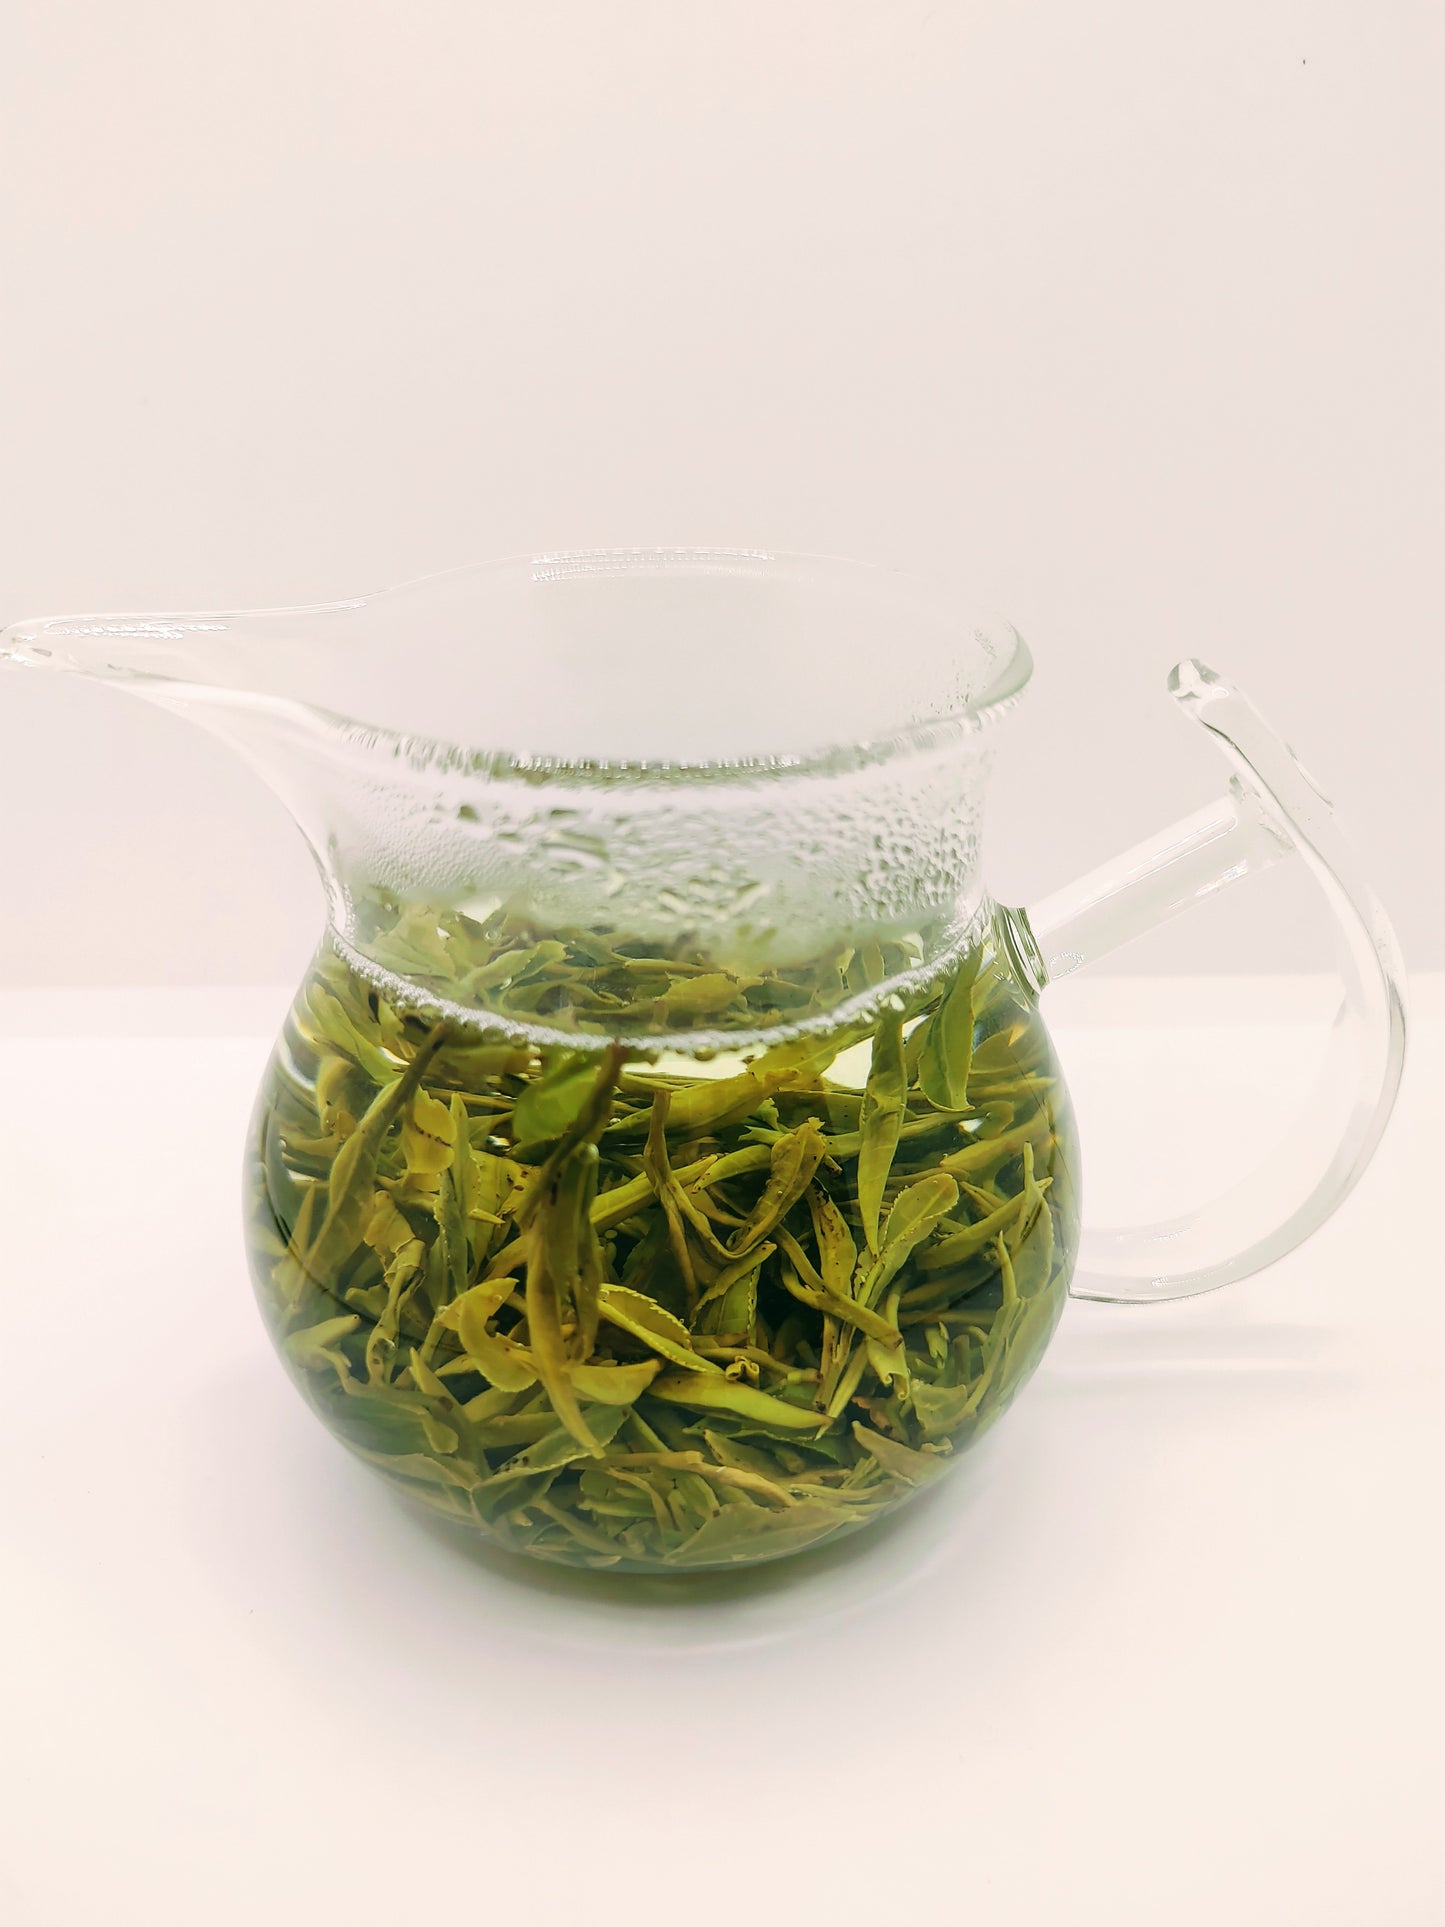 Picture of a pitcher with green tea brewing inside, Yun Wu.